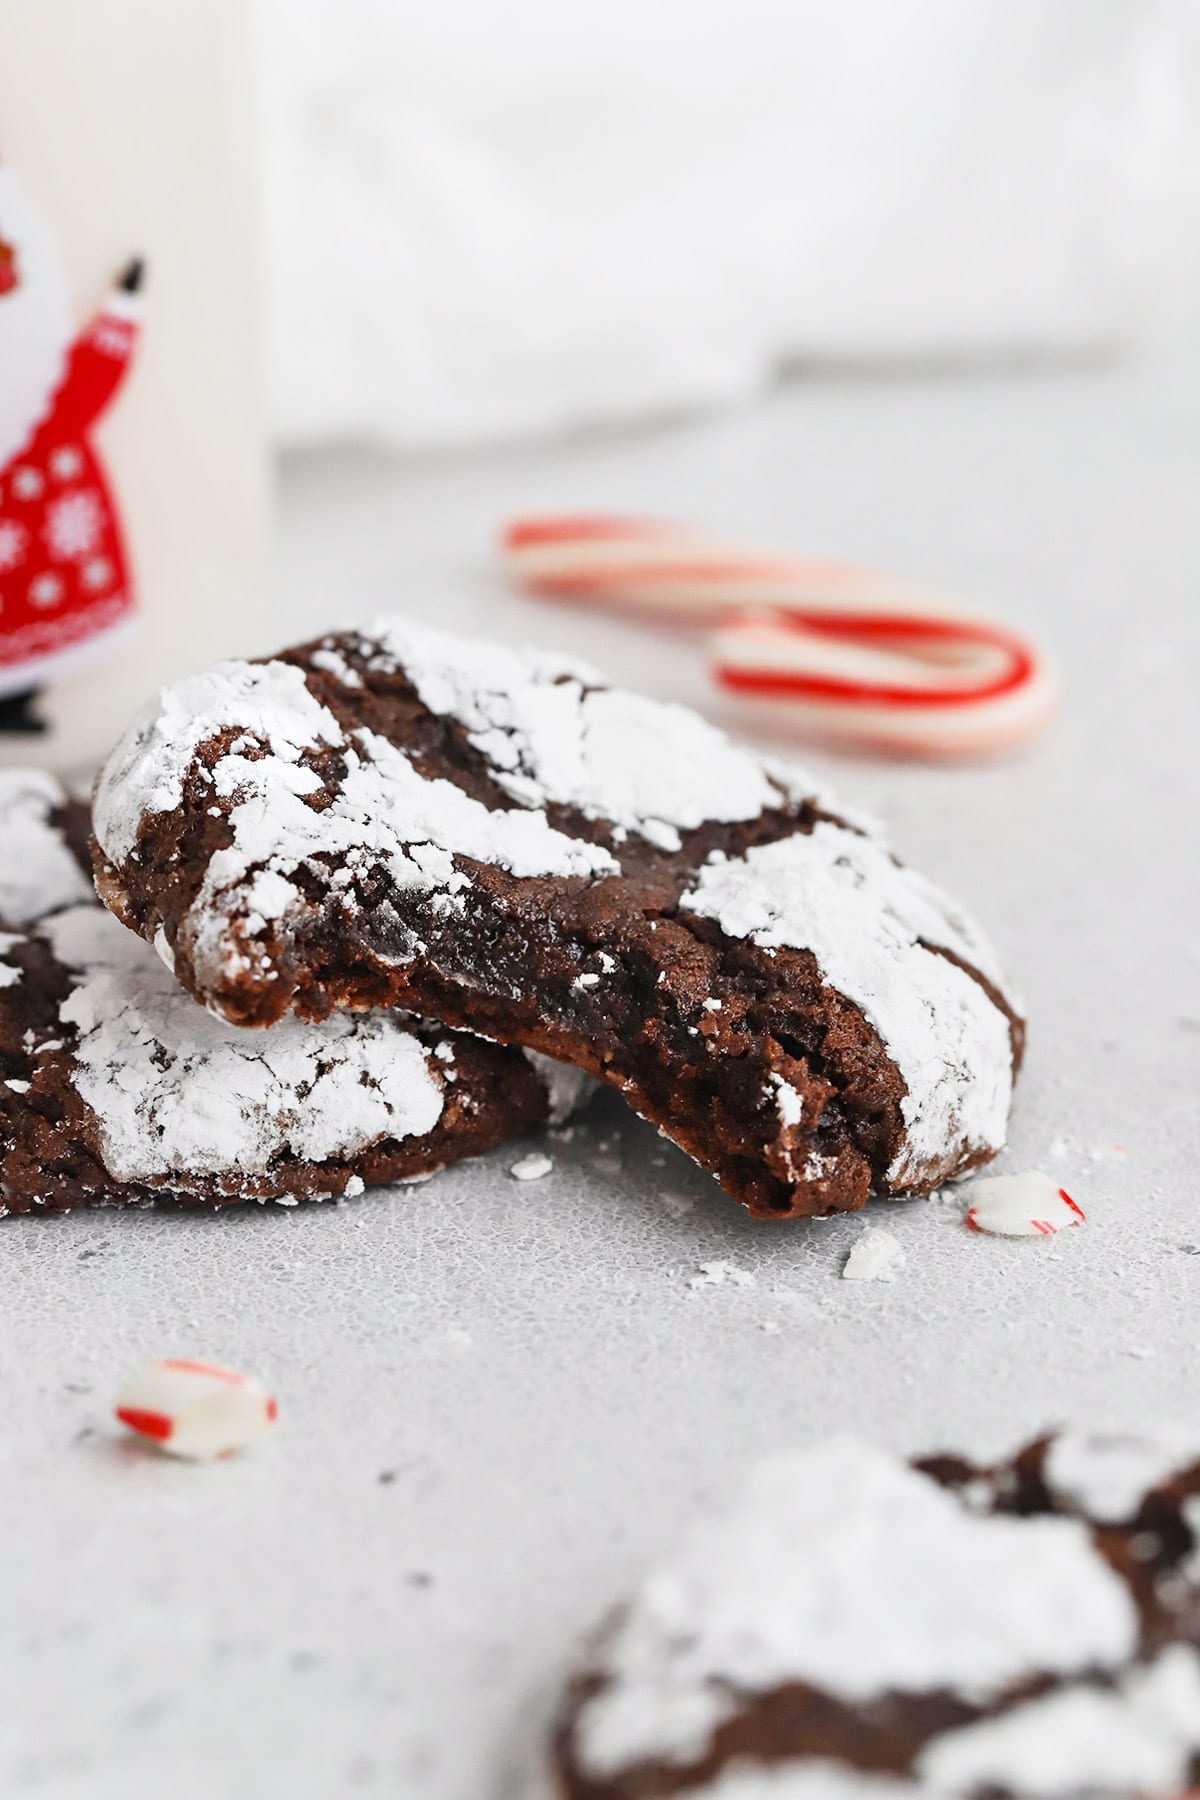 Front view of gluten-free peppermint chocolate crinkle cookies. One cookie has a bite out of it revealing a fudgy center.